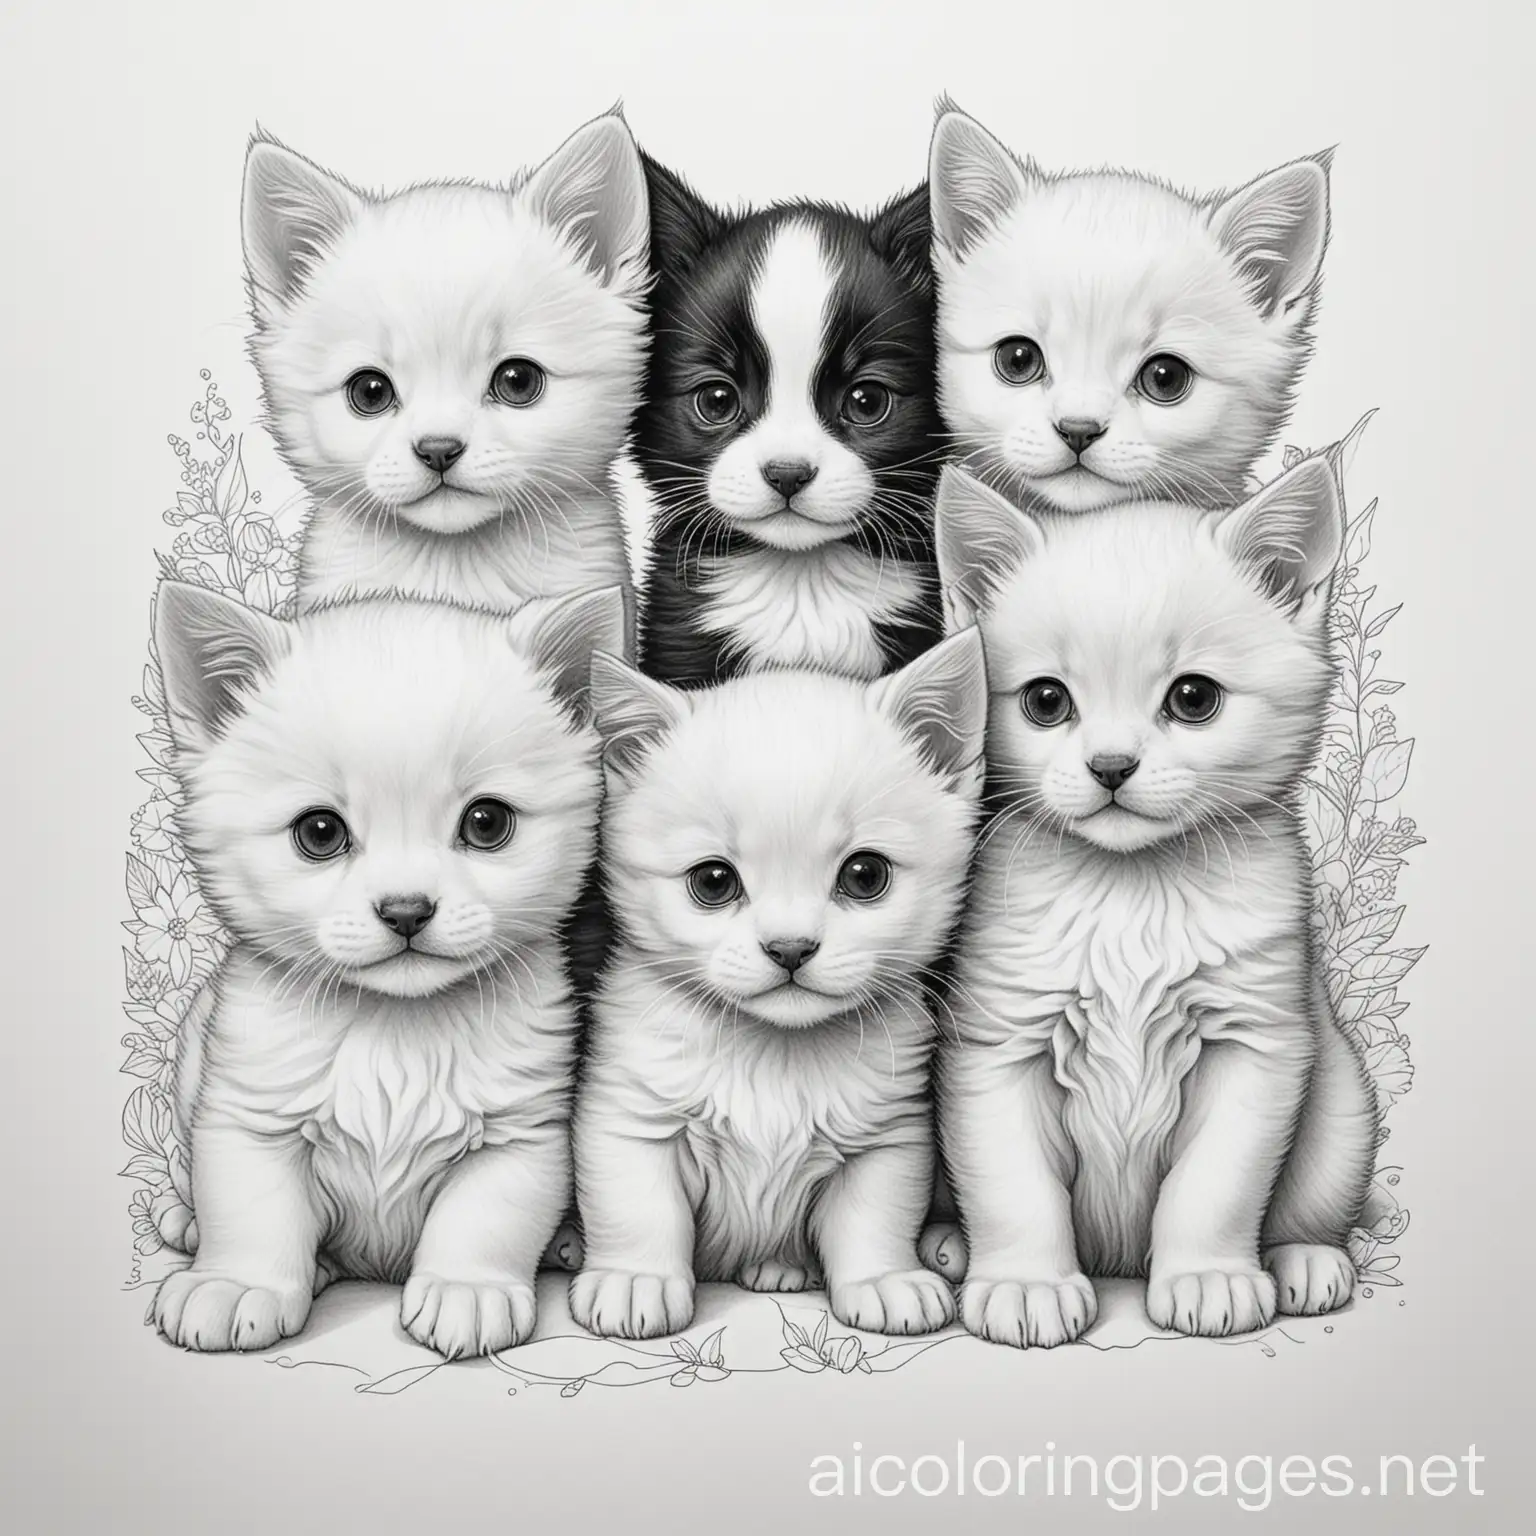 coloring of puppies and kittens, Coloring Page, black and white, line art, white background, Simplicity, Ample White Space. The background of the coloring page is plain white to make it easy for young children to color within the lines. The outlines of all the subjects are easy to distinguish, making it simple for kids to color without too much difficulty